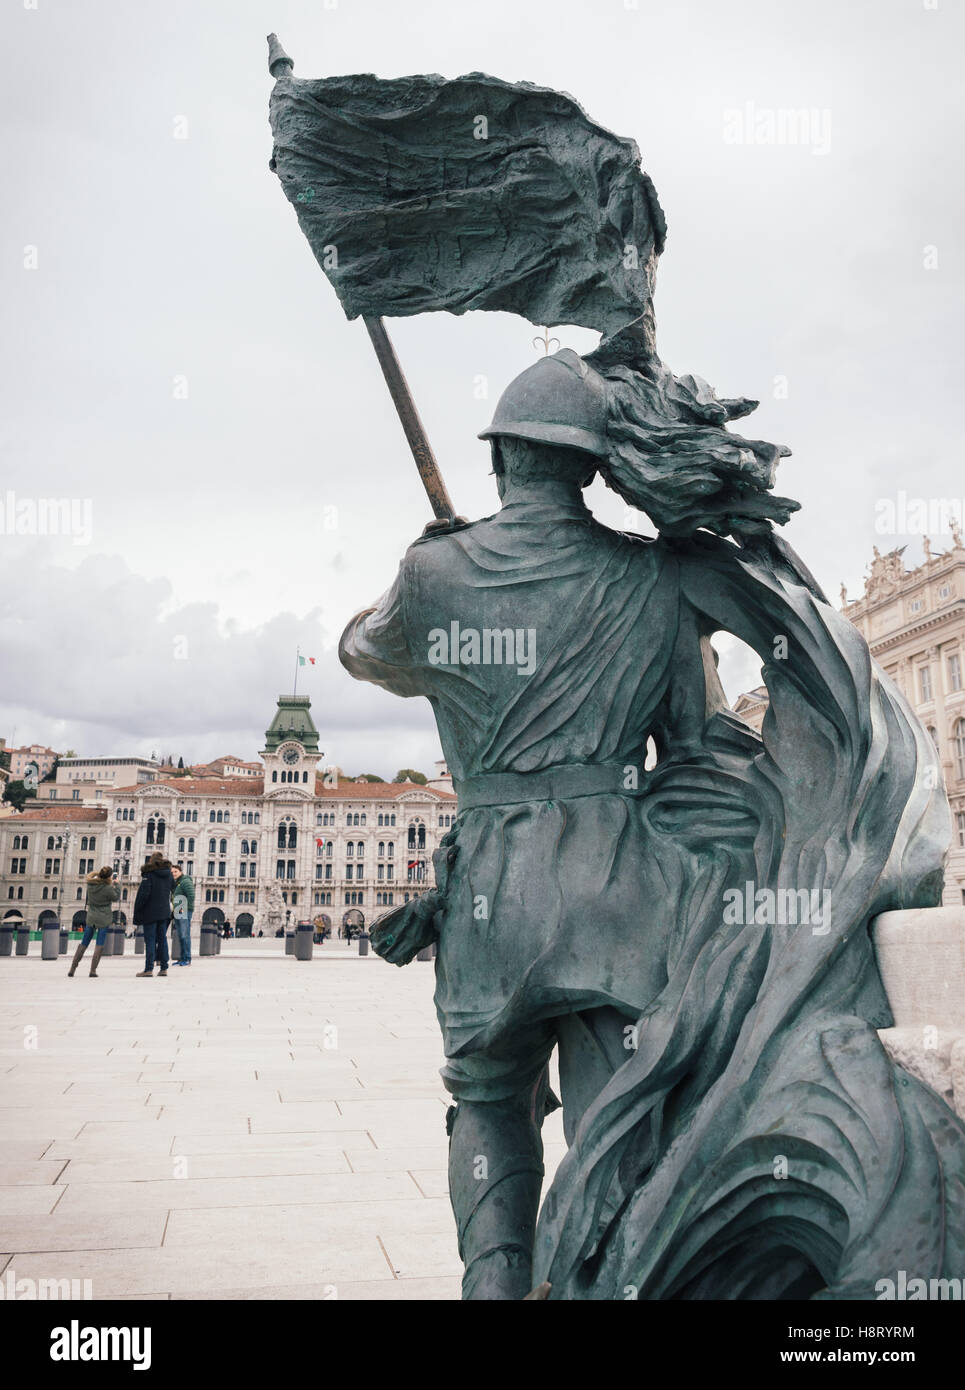 Bronze of Bersagliere soldier statue with flag in Trieste. Sculpture representing solders on the waterfront in Trieste, Italy. Stock Photo